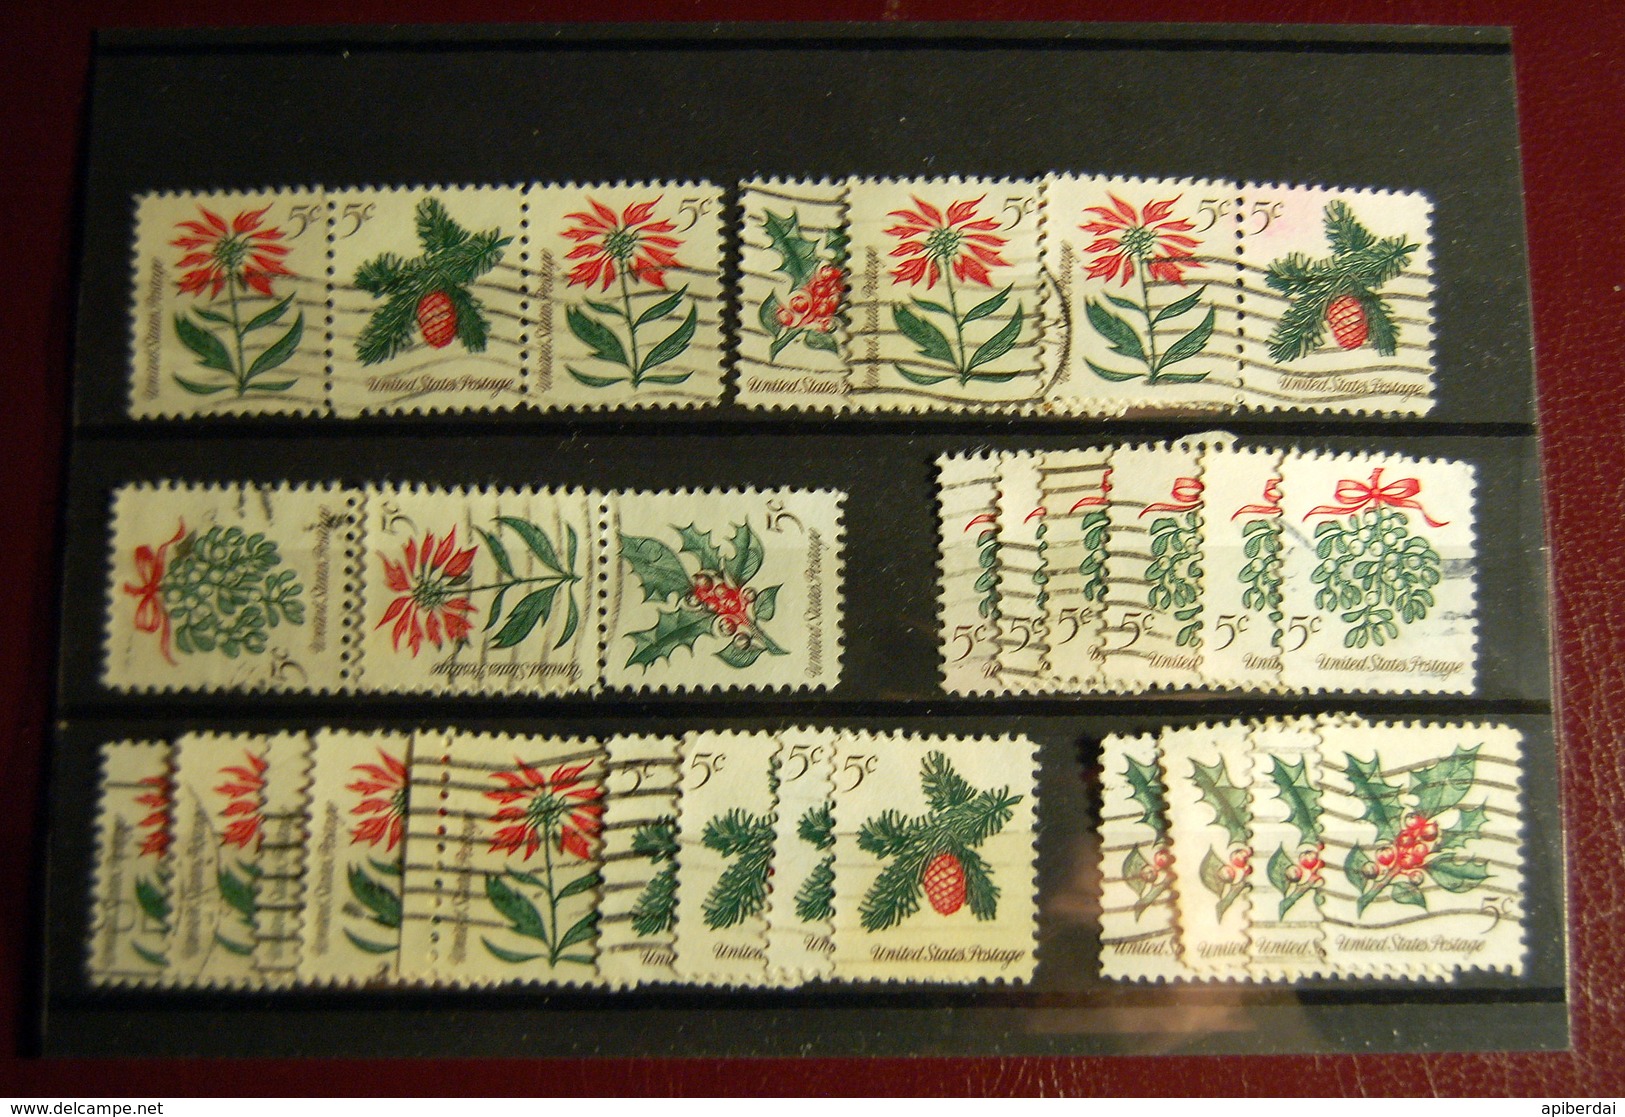 USA - 230 stamps christmas & greetings used on 8 classification cards